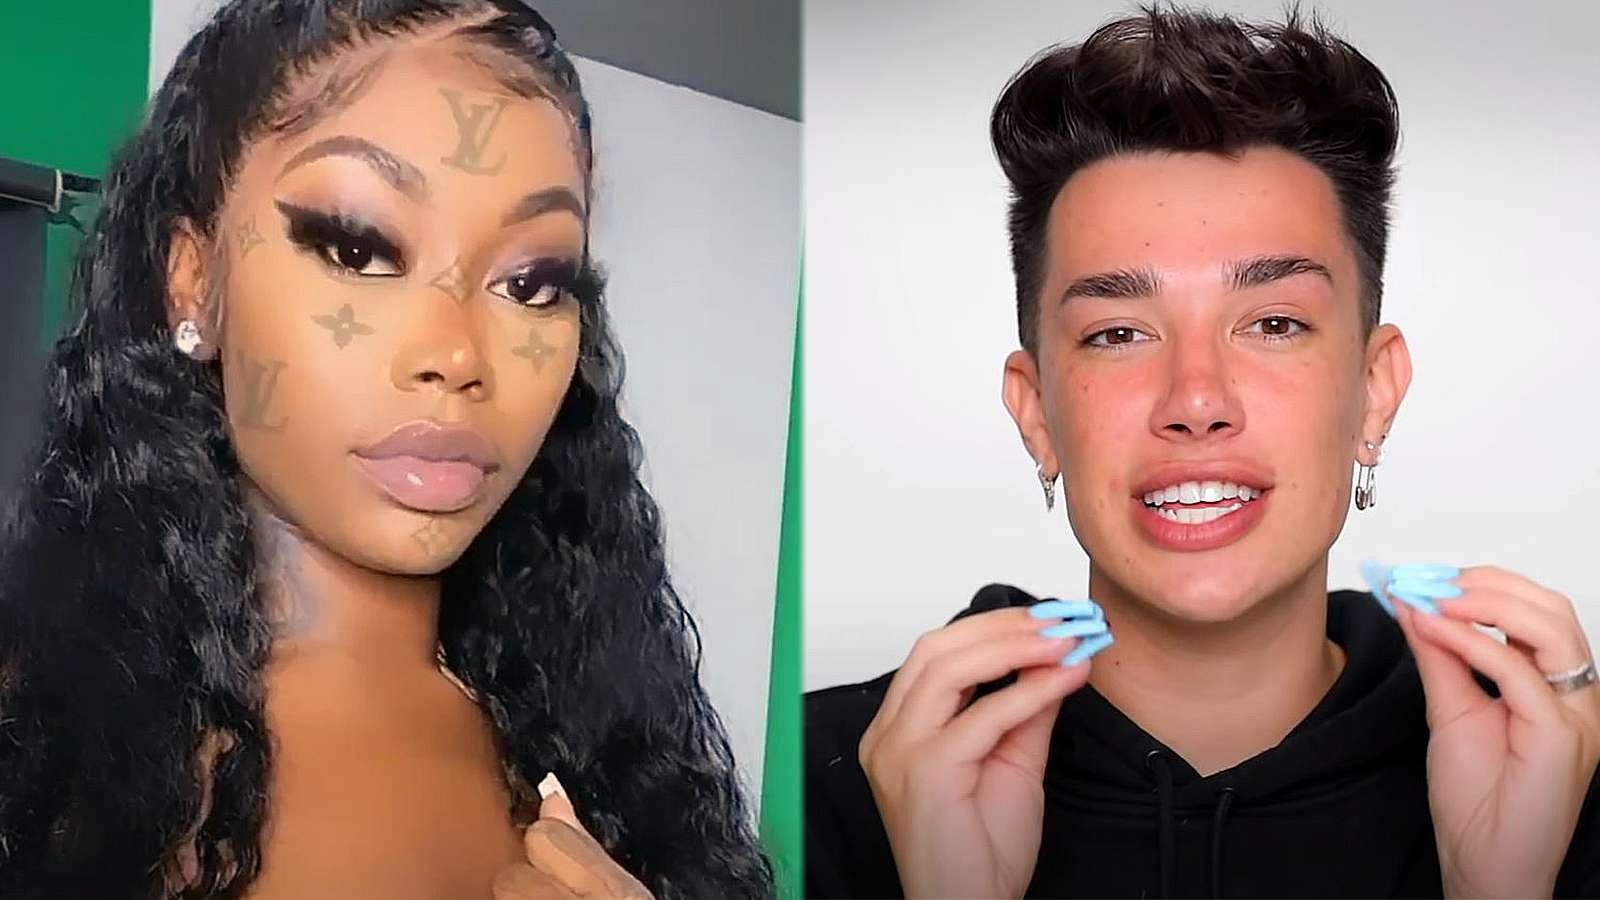 James Charles feuds with Asian Doll